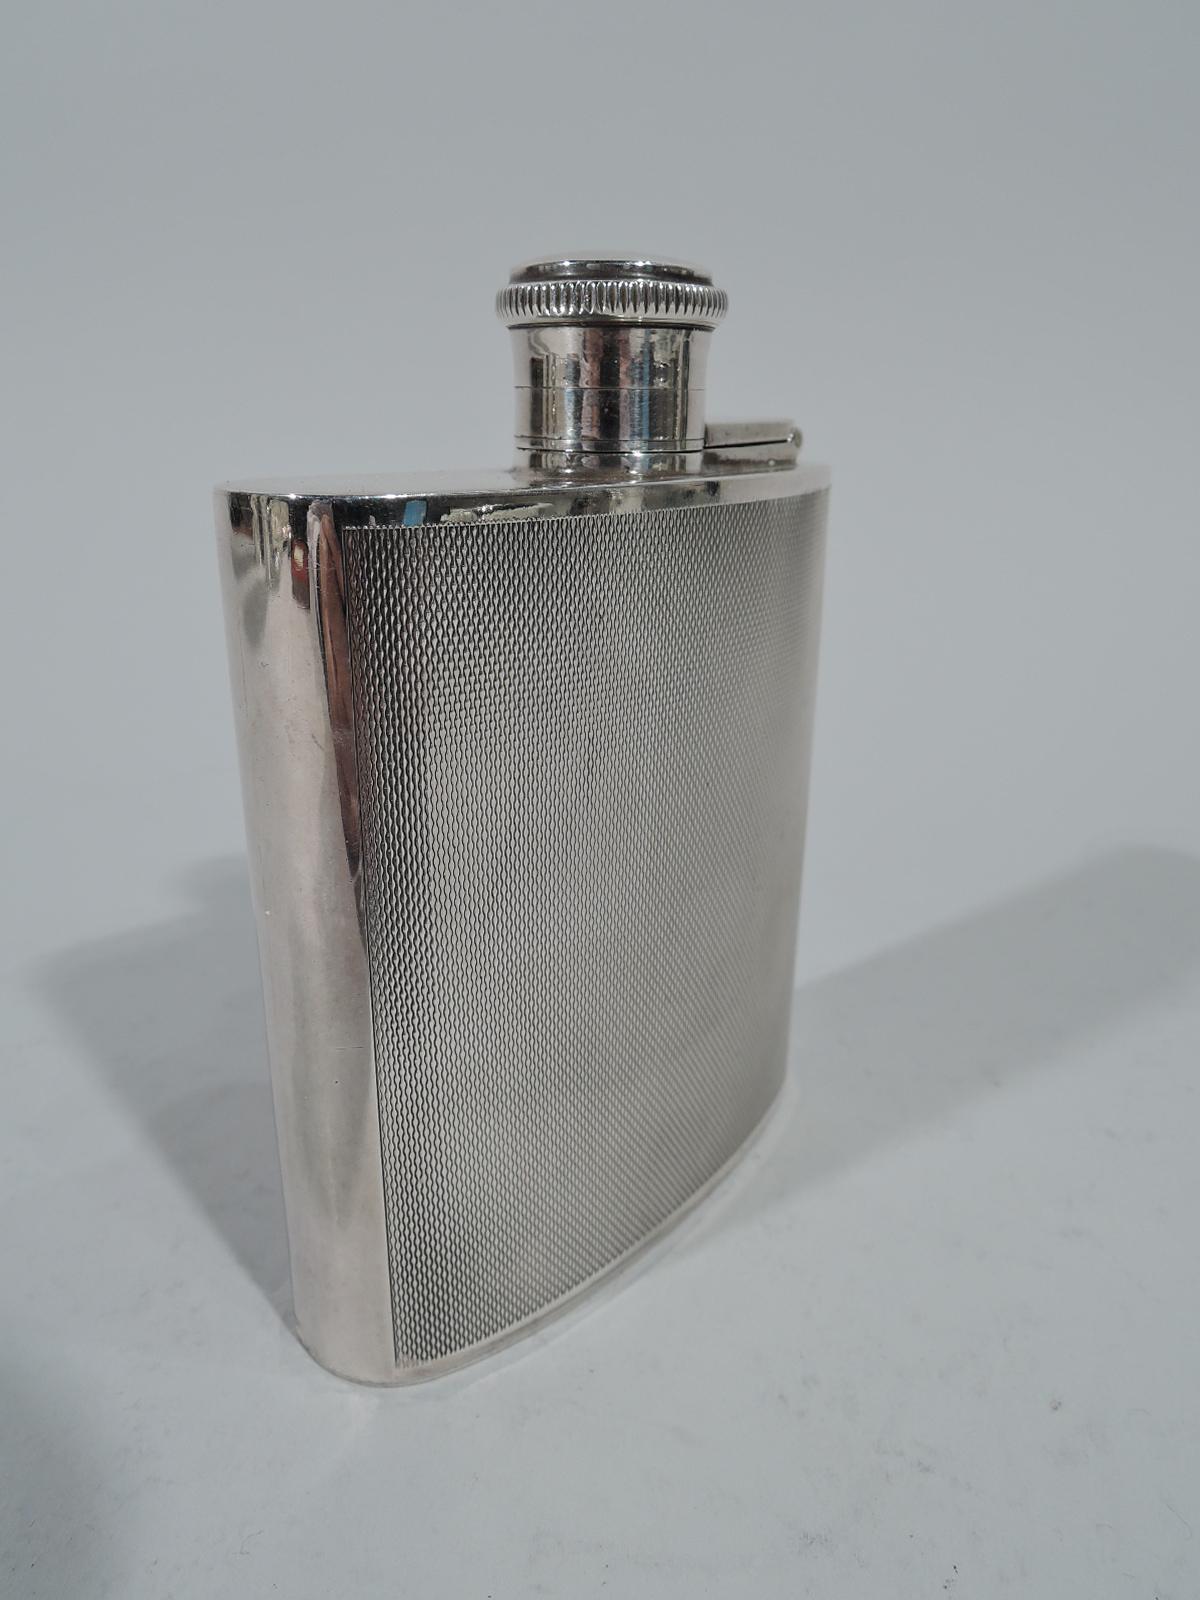 Art Deco sterling silver mini hip flask. Made by Joseph Gloster in Chester in 1939 curved body with hinged and cork-lined cover. Front and back have all-over engine-turned vertical wave pattern. Holds 1 gill. Hallmarked. Weight: 4.6 troy ounces.